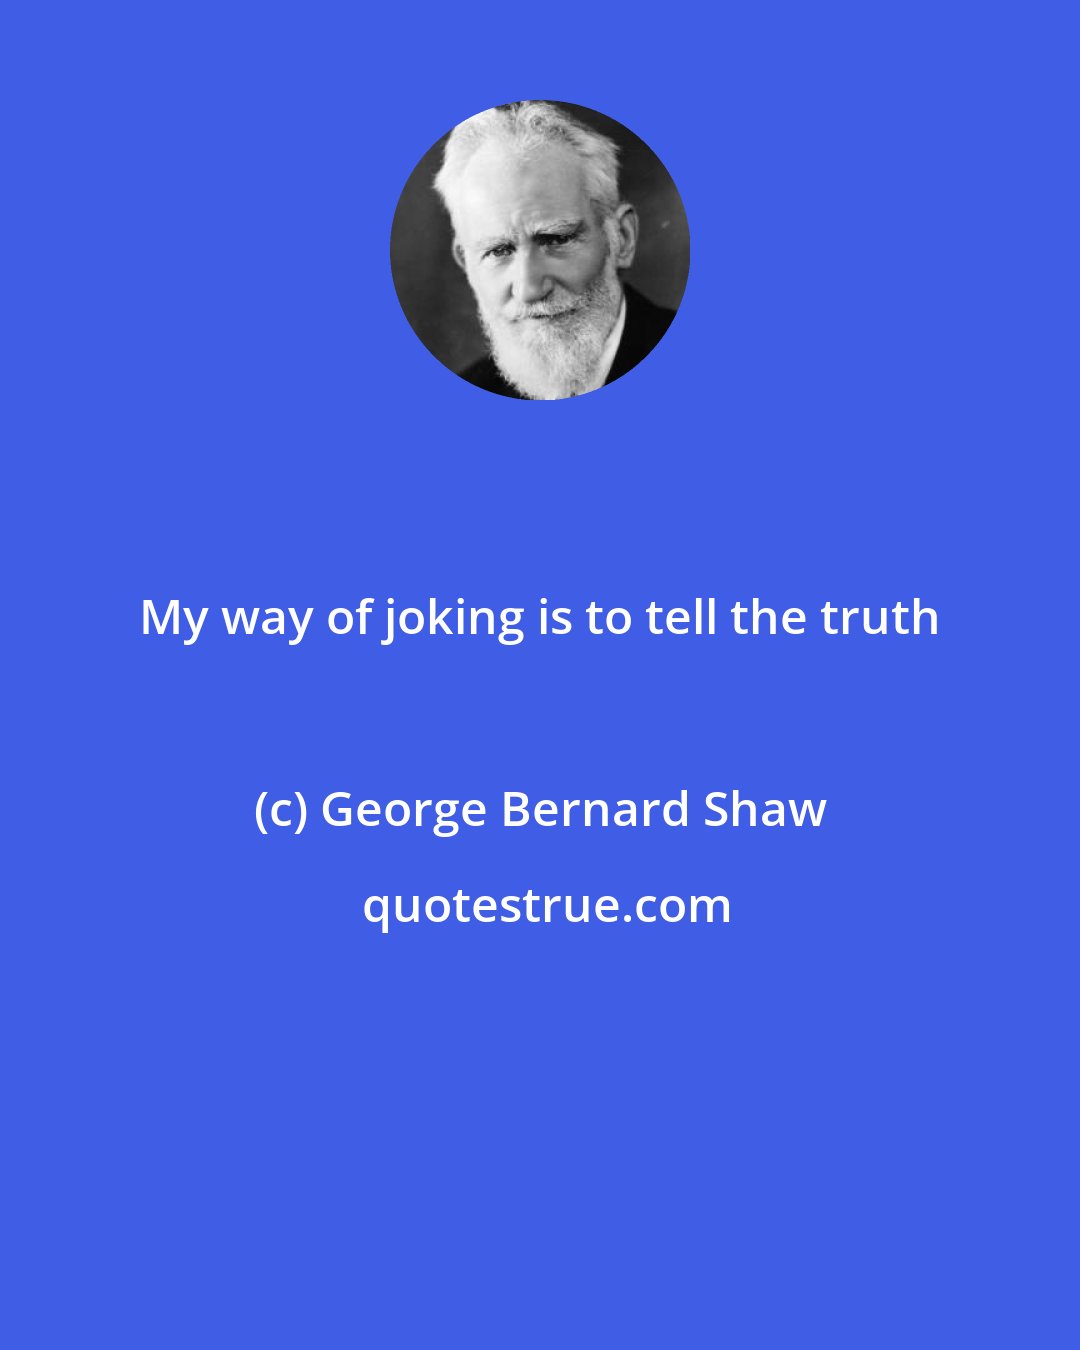 George Bernard Shaw: My way of joking is to tell the truth